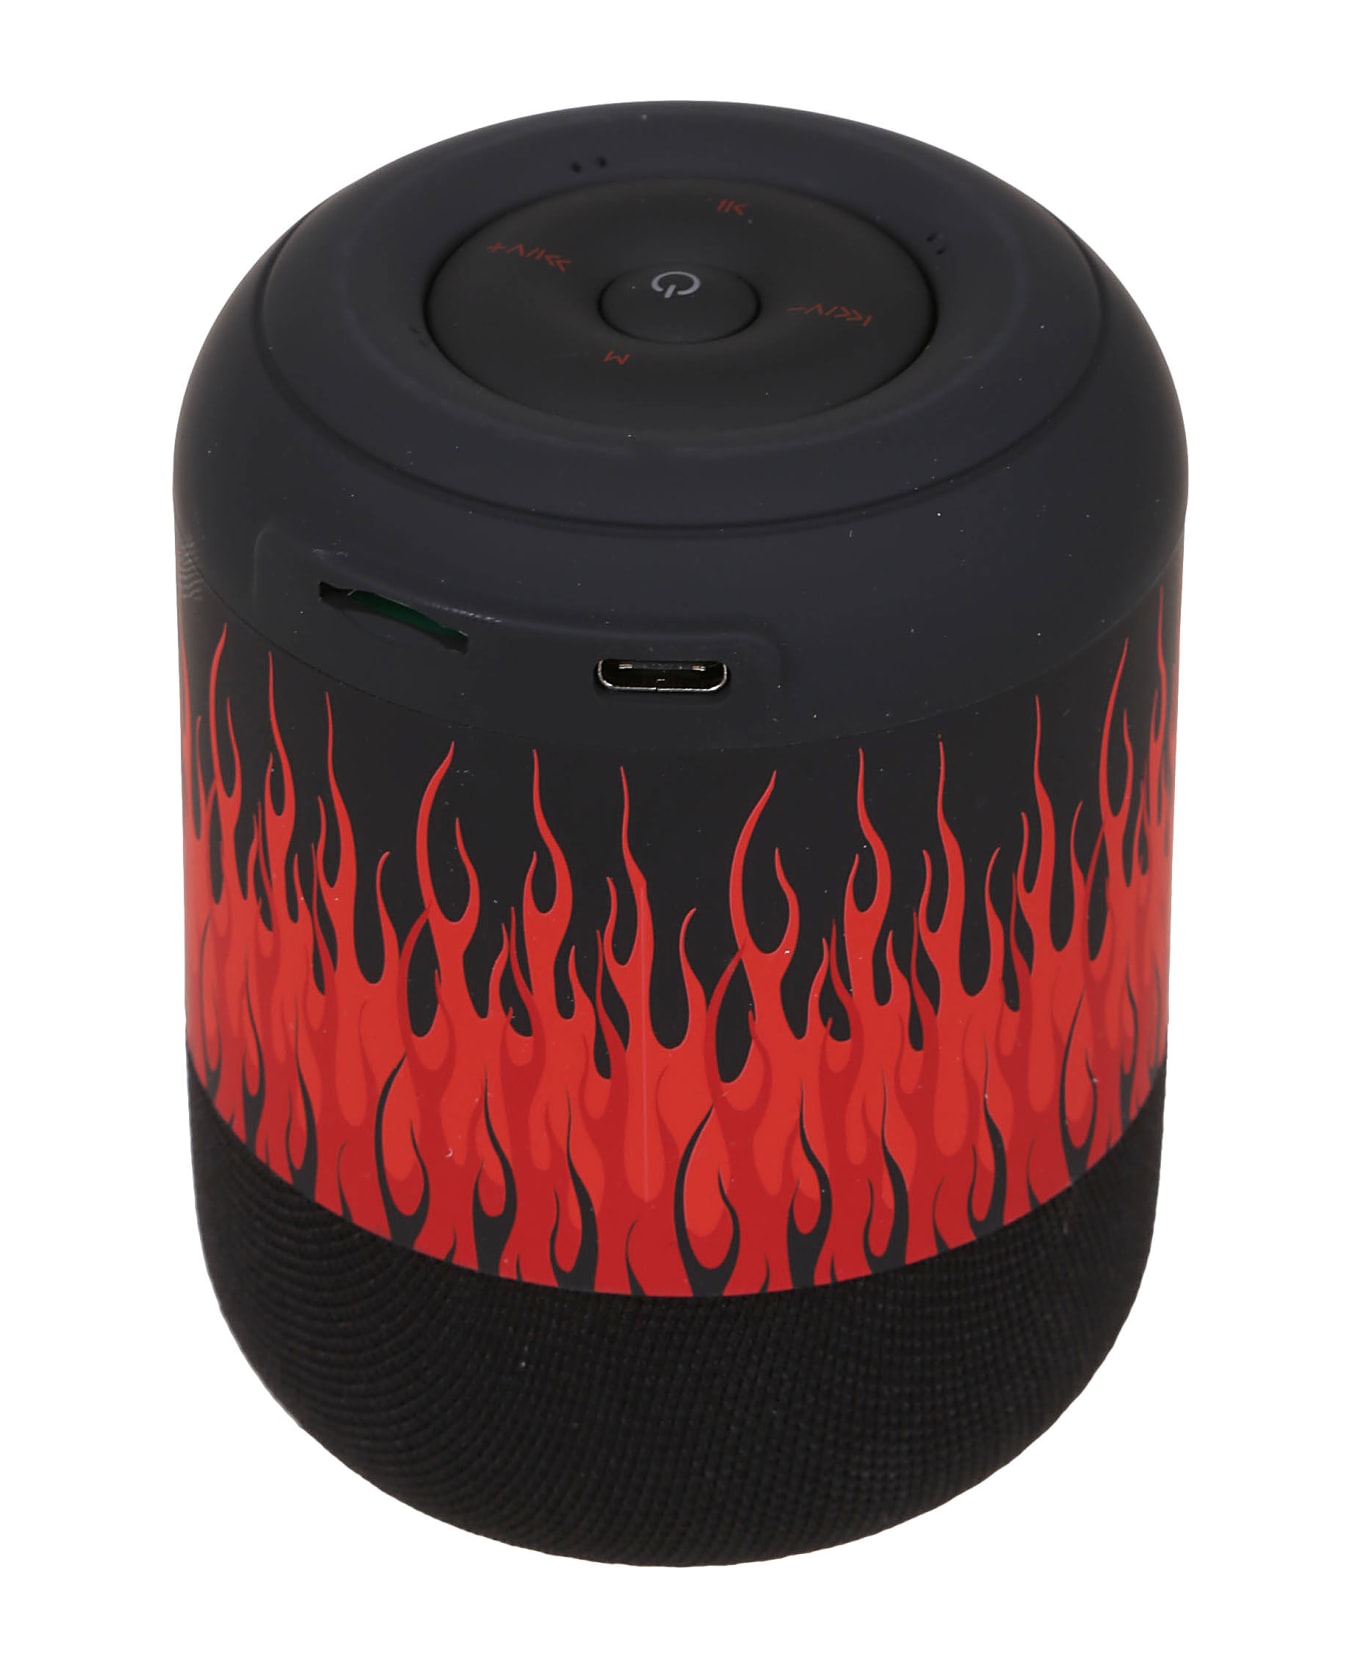 Vision of Super Black Speaker With Red Flames And White Logo - Black